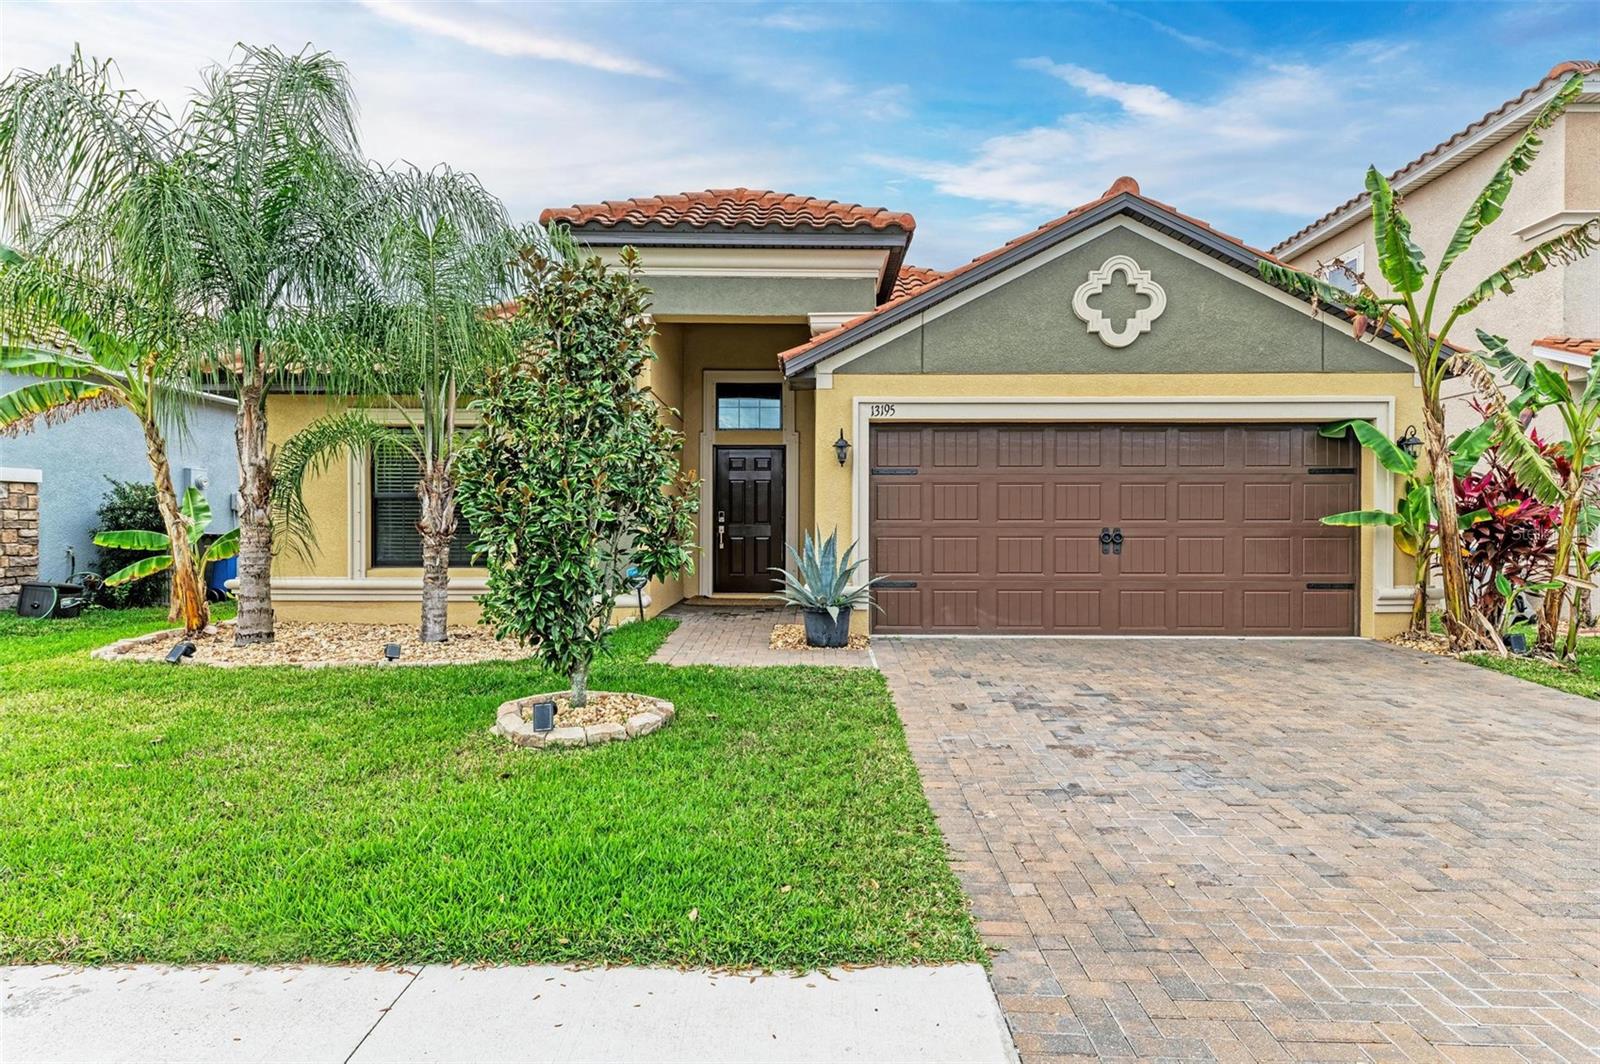 Beautiful 4 bedroom/3 bath house in Waterleaf!  Pavered drive with tile roof!  Stunning!